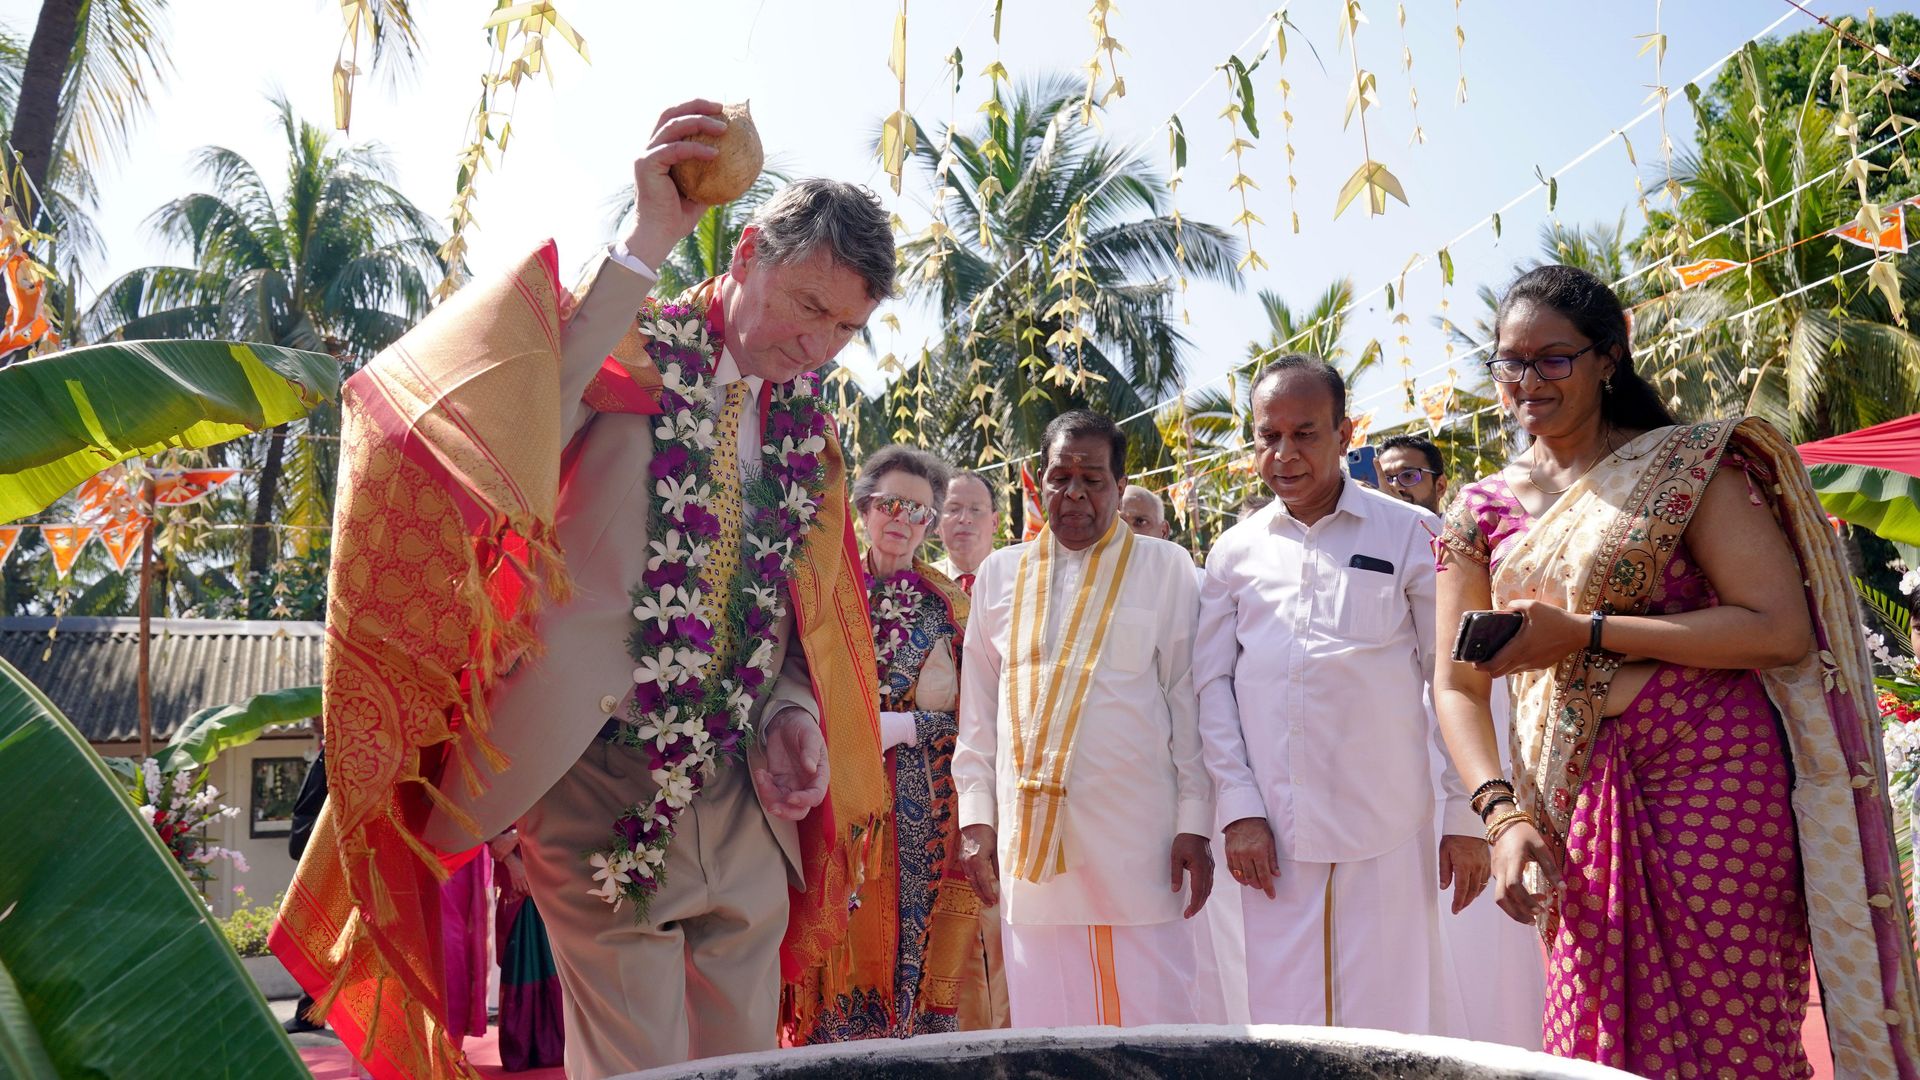 Vice Admiral Sir Timothy Laurence smashes a coconut, a ritual believed to banish bad luck, during a visit to Vajira Pillayar Kovil Hindu temple in Colombo, Sri Lanka